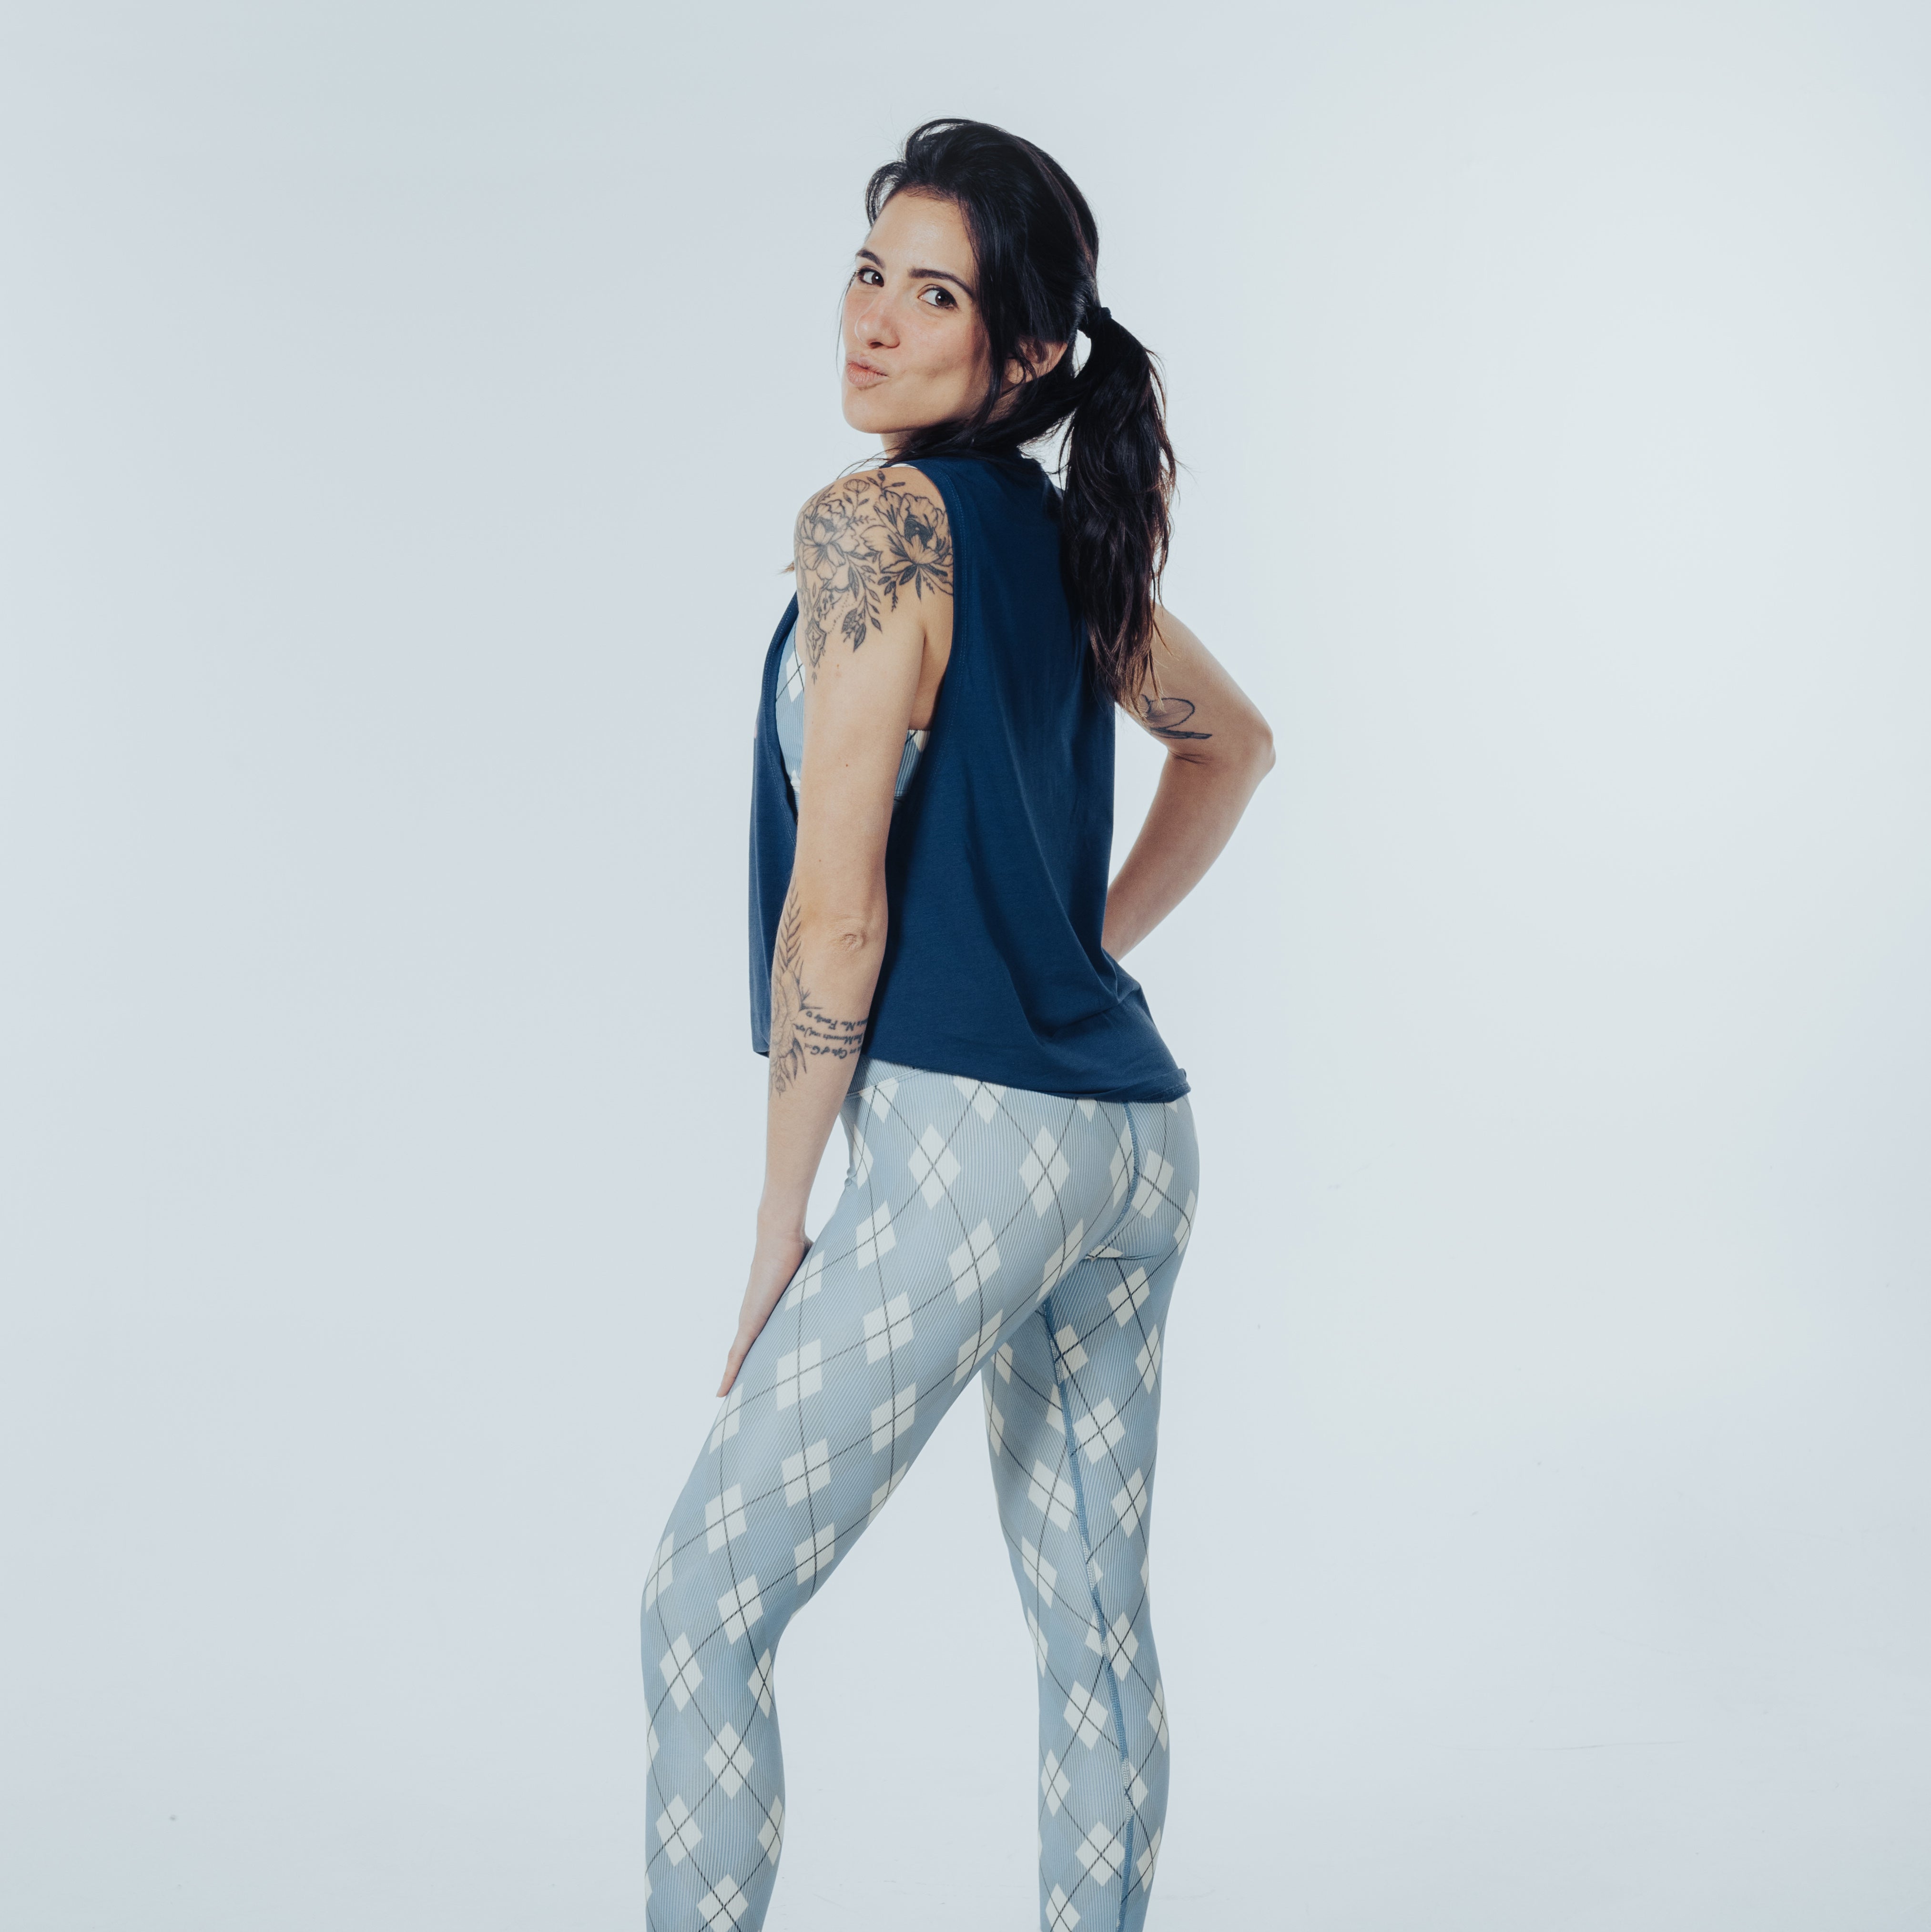 Barre workouts: Stylish leggings and tanks